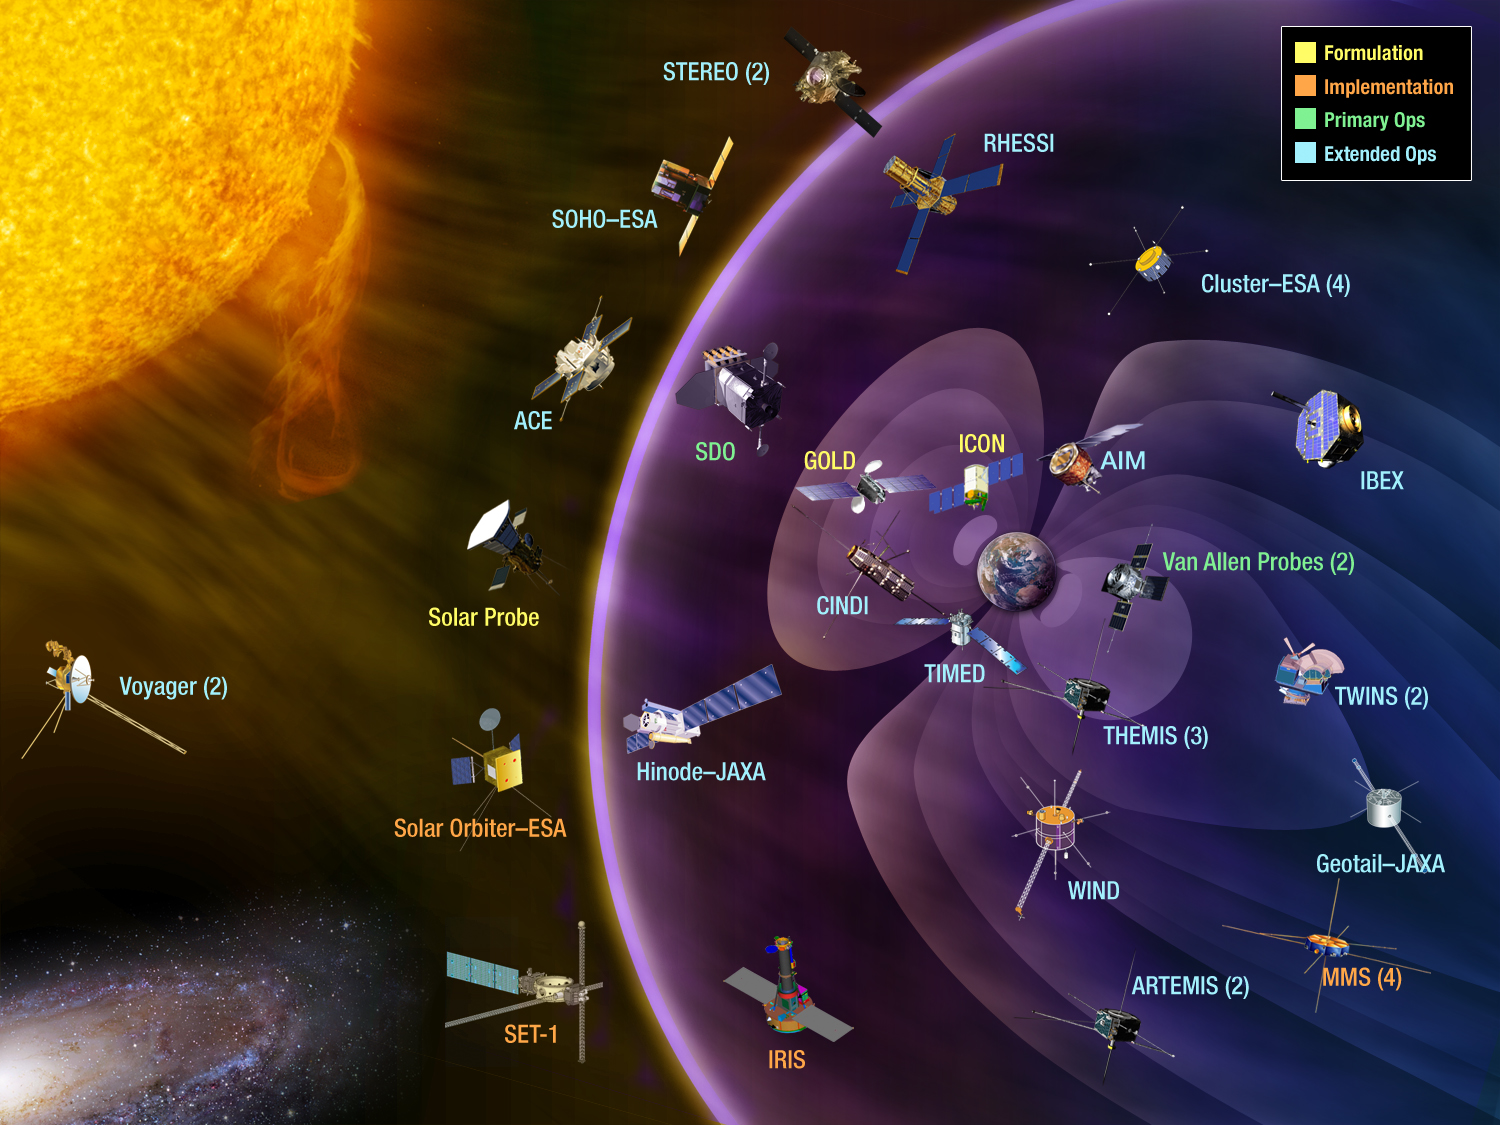 Diagram illustrating the spacecraft in the Heliophysics System Observatory and where they are located with respect to Earth and the sun.